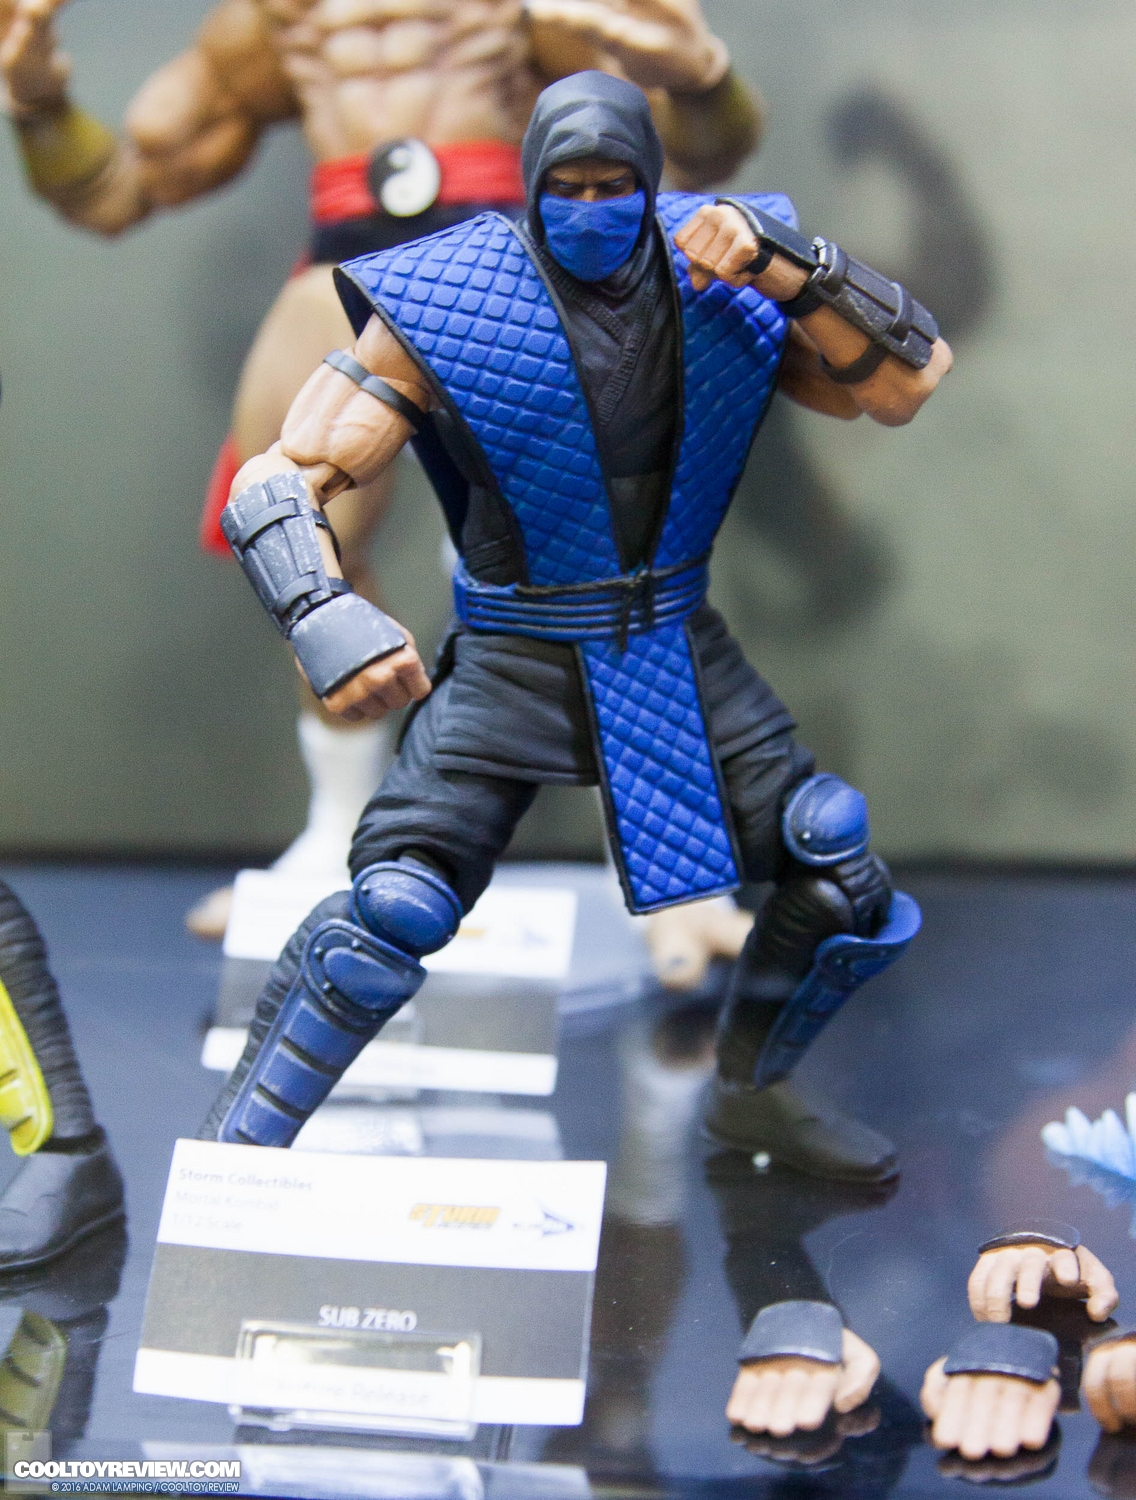 san-diego-comic-con-storm-collectibles-booth-018.jpg